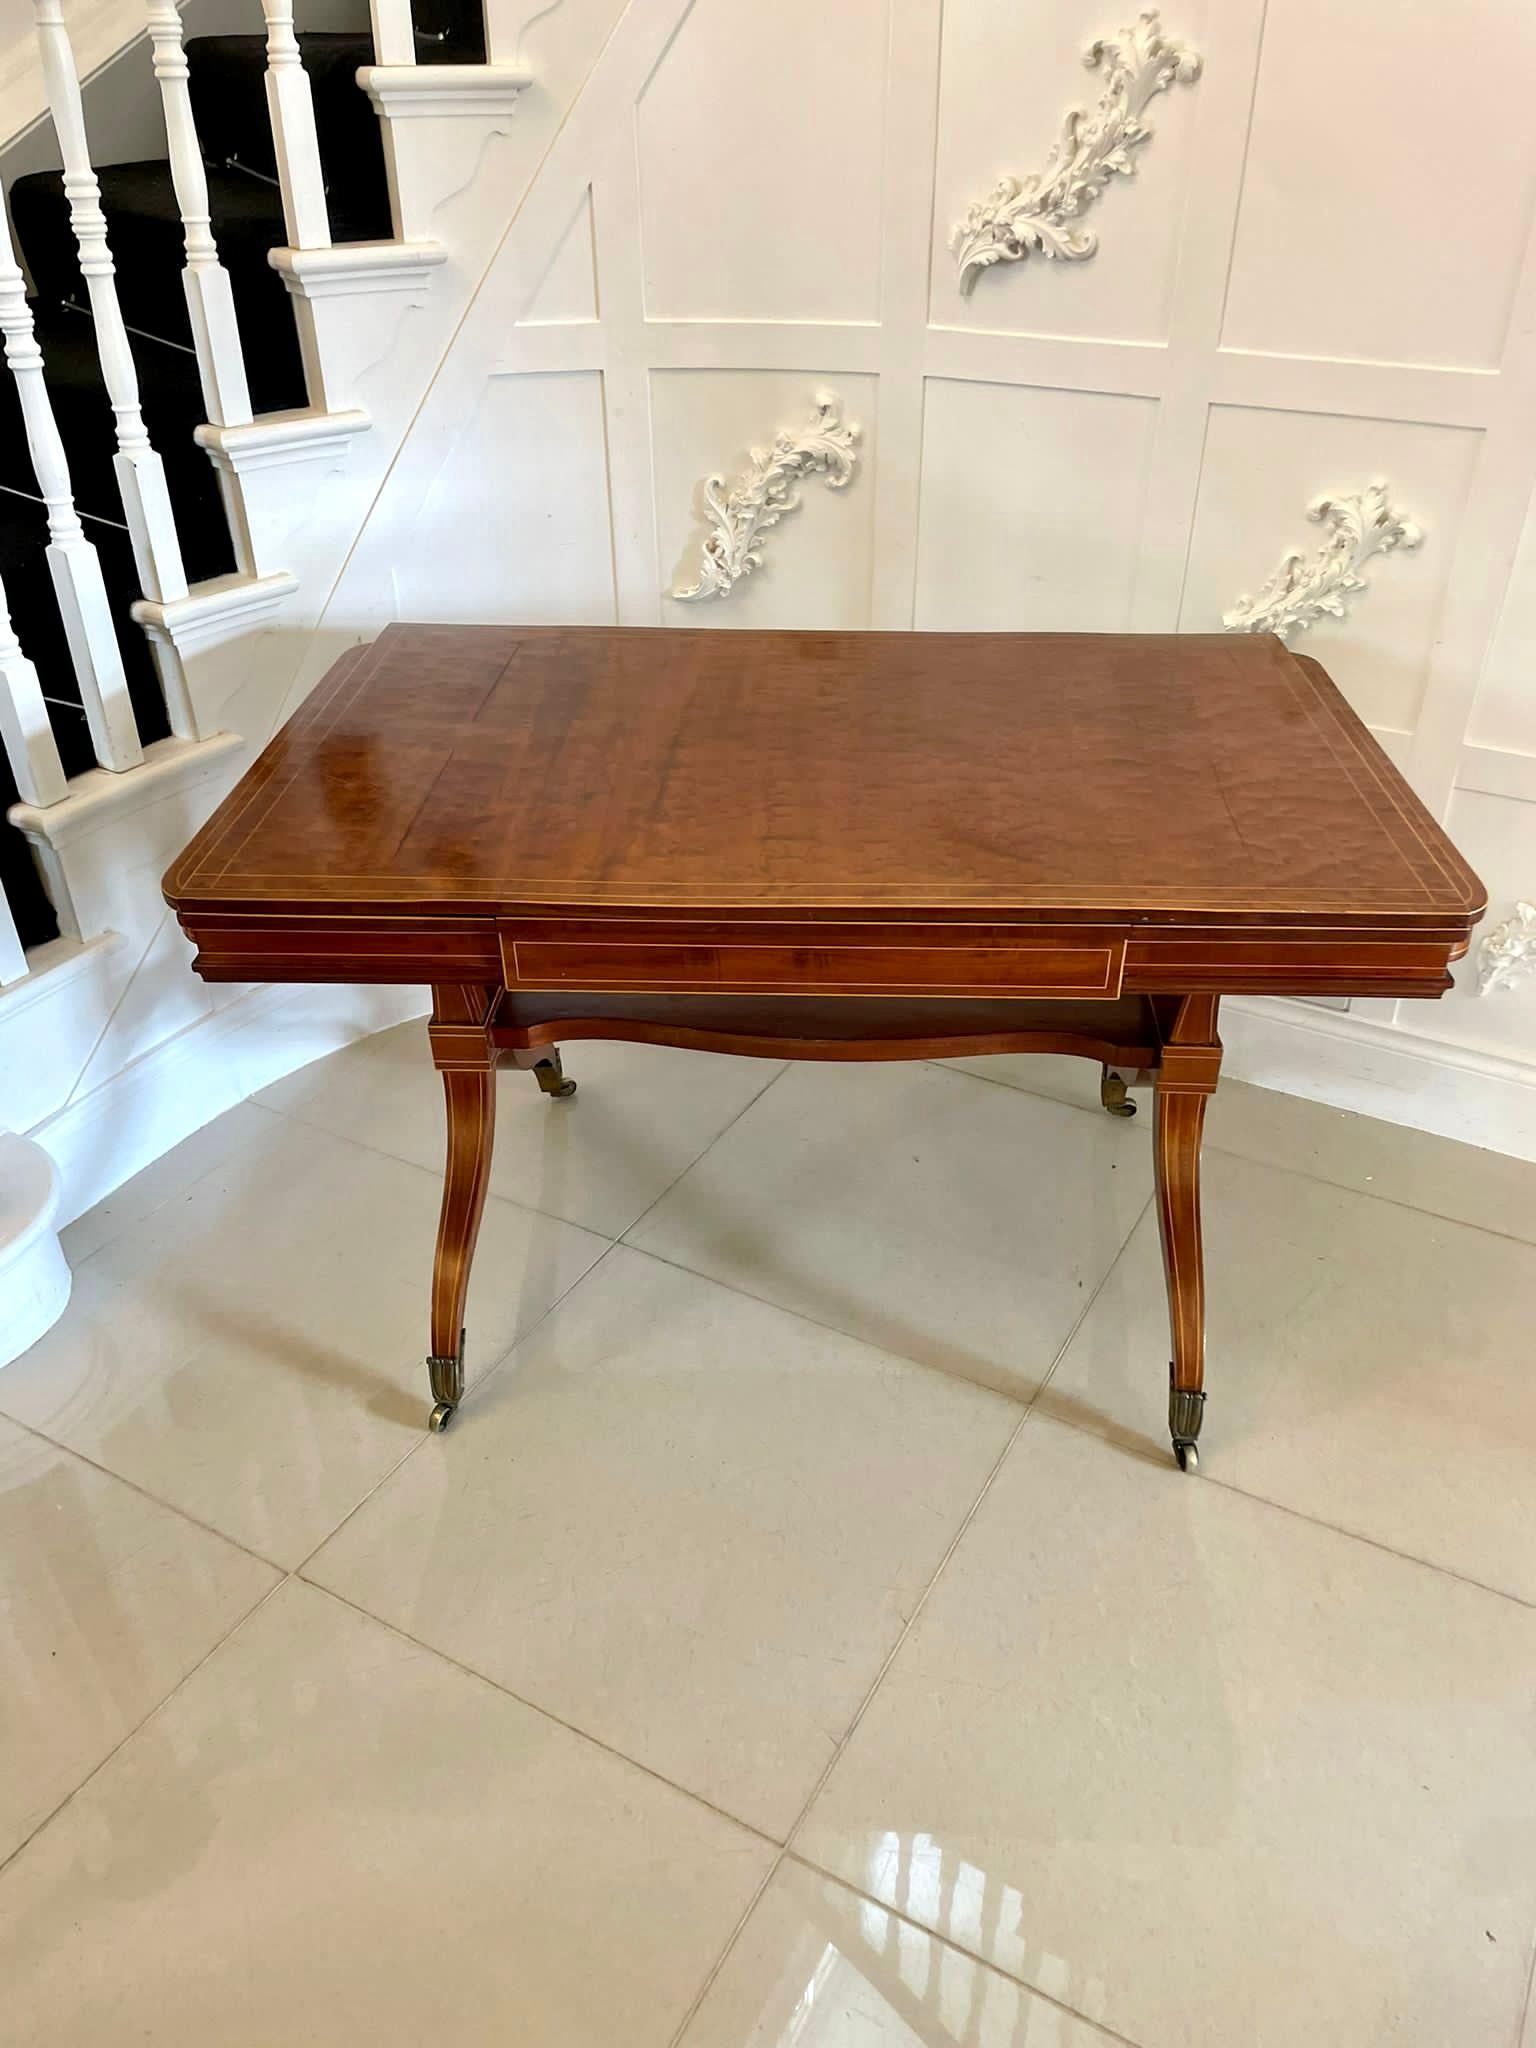 Unusual Antique Regency quality mahogany and satinwood inlaid freestanding sofa/dining table having a fantastic quality mahogany top with inlaid satinwood stringing with two unusual sliding leaves, mahogany frieze with inlaid satinwood stringing